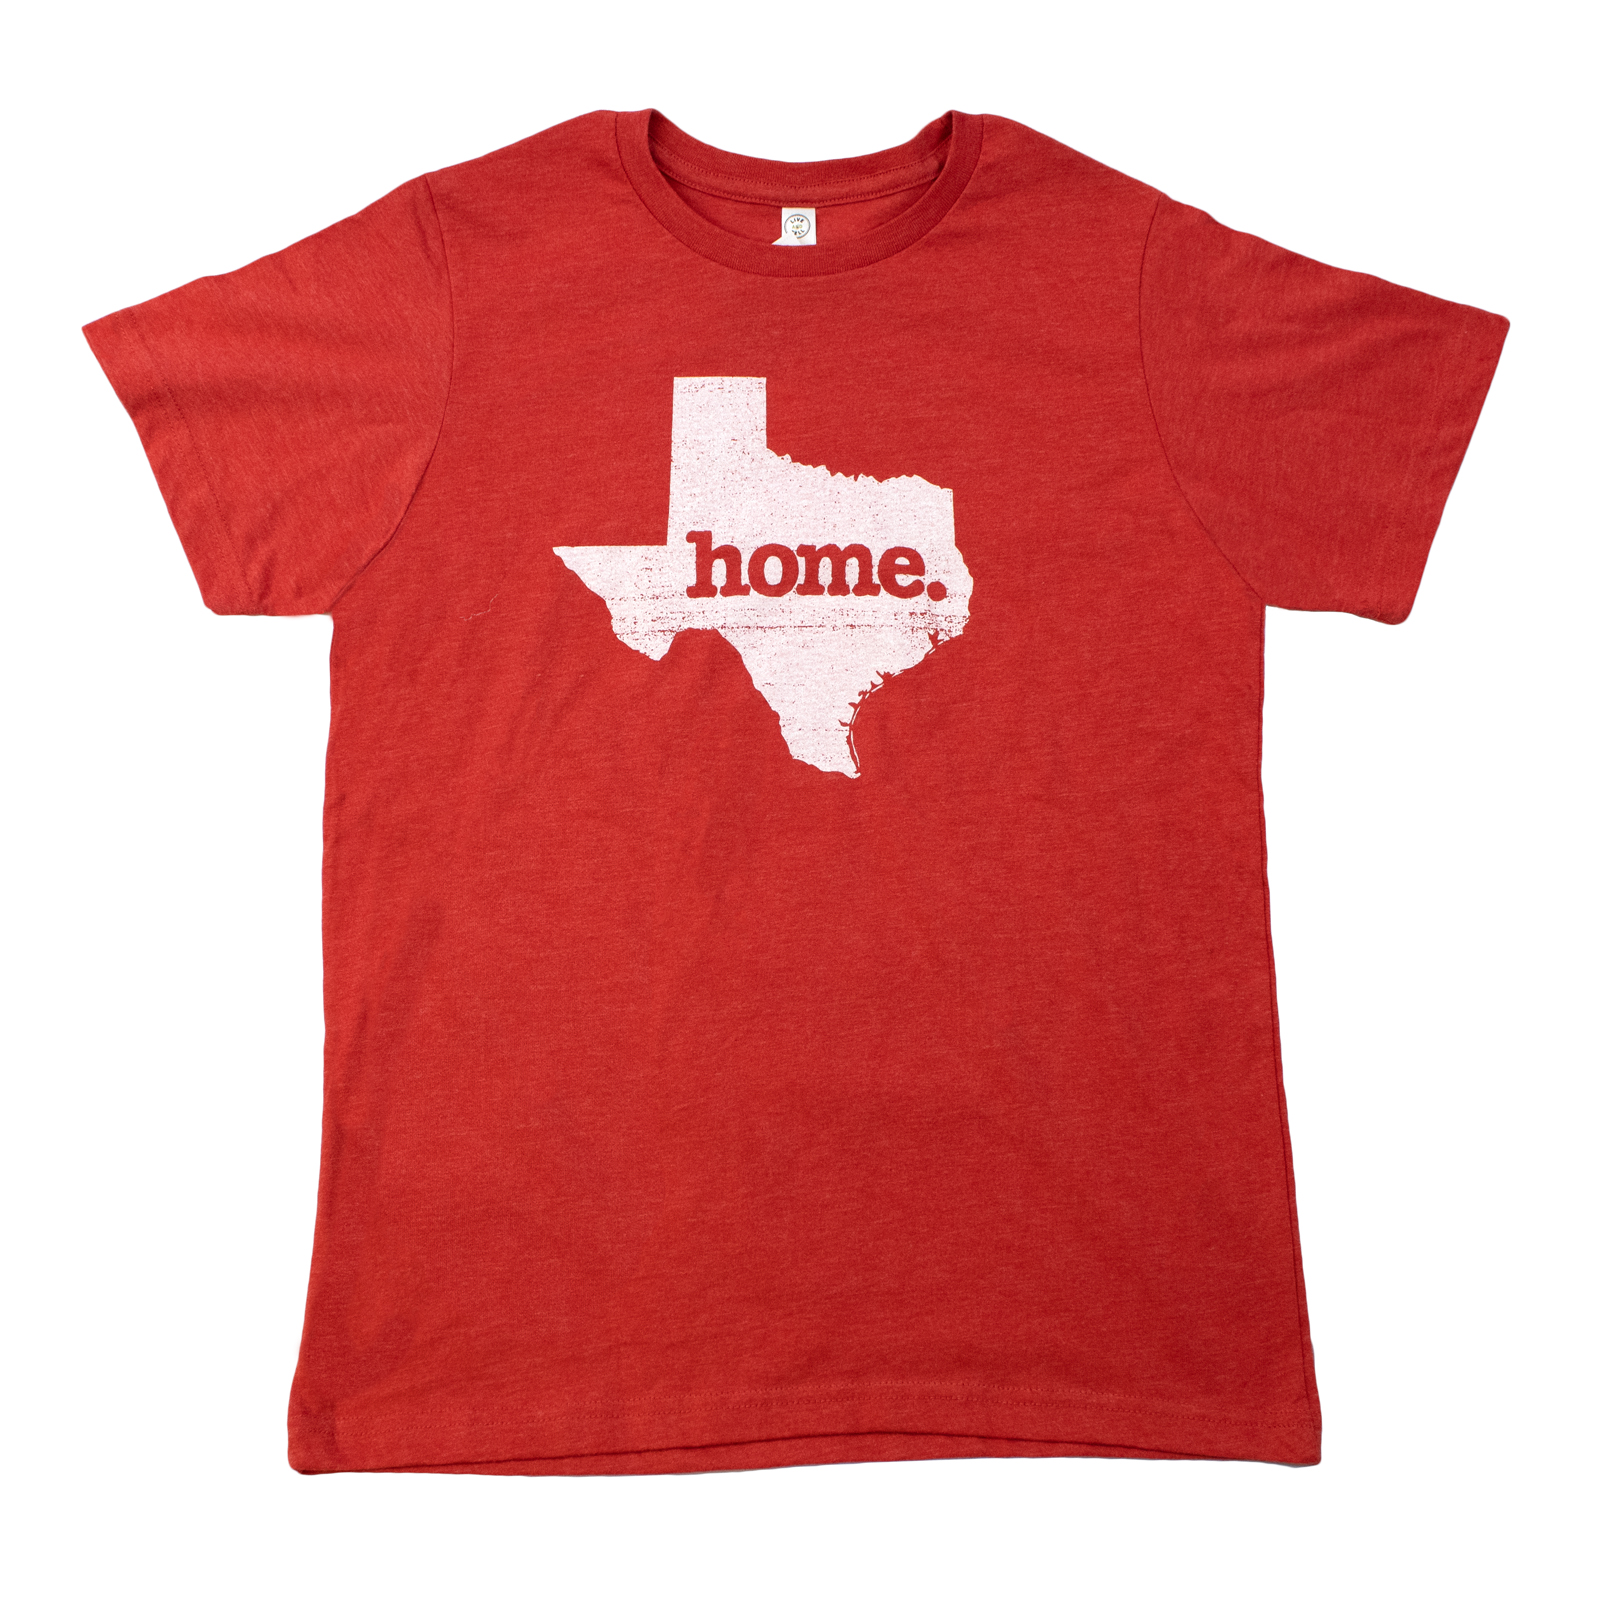 Texas Home Youth T-Shirt - Red